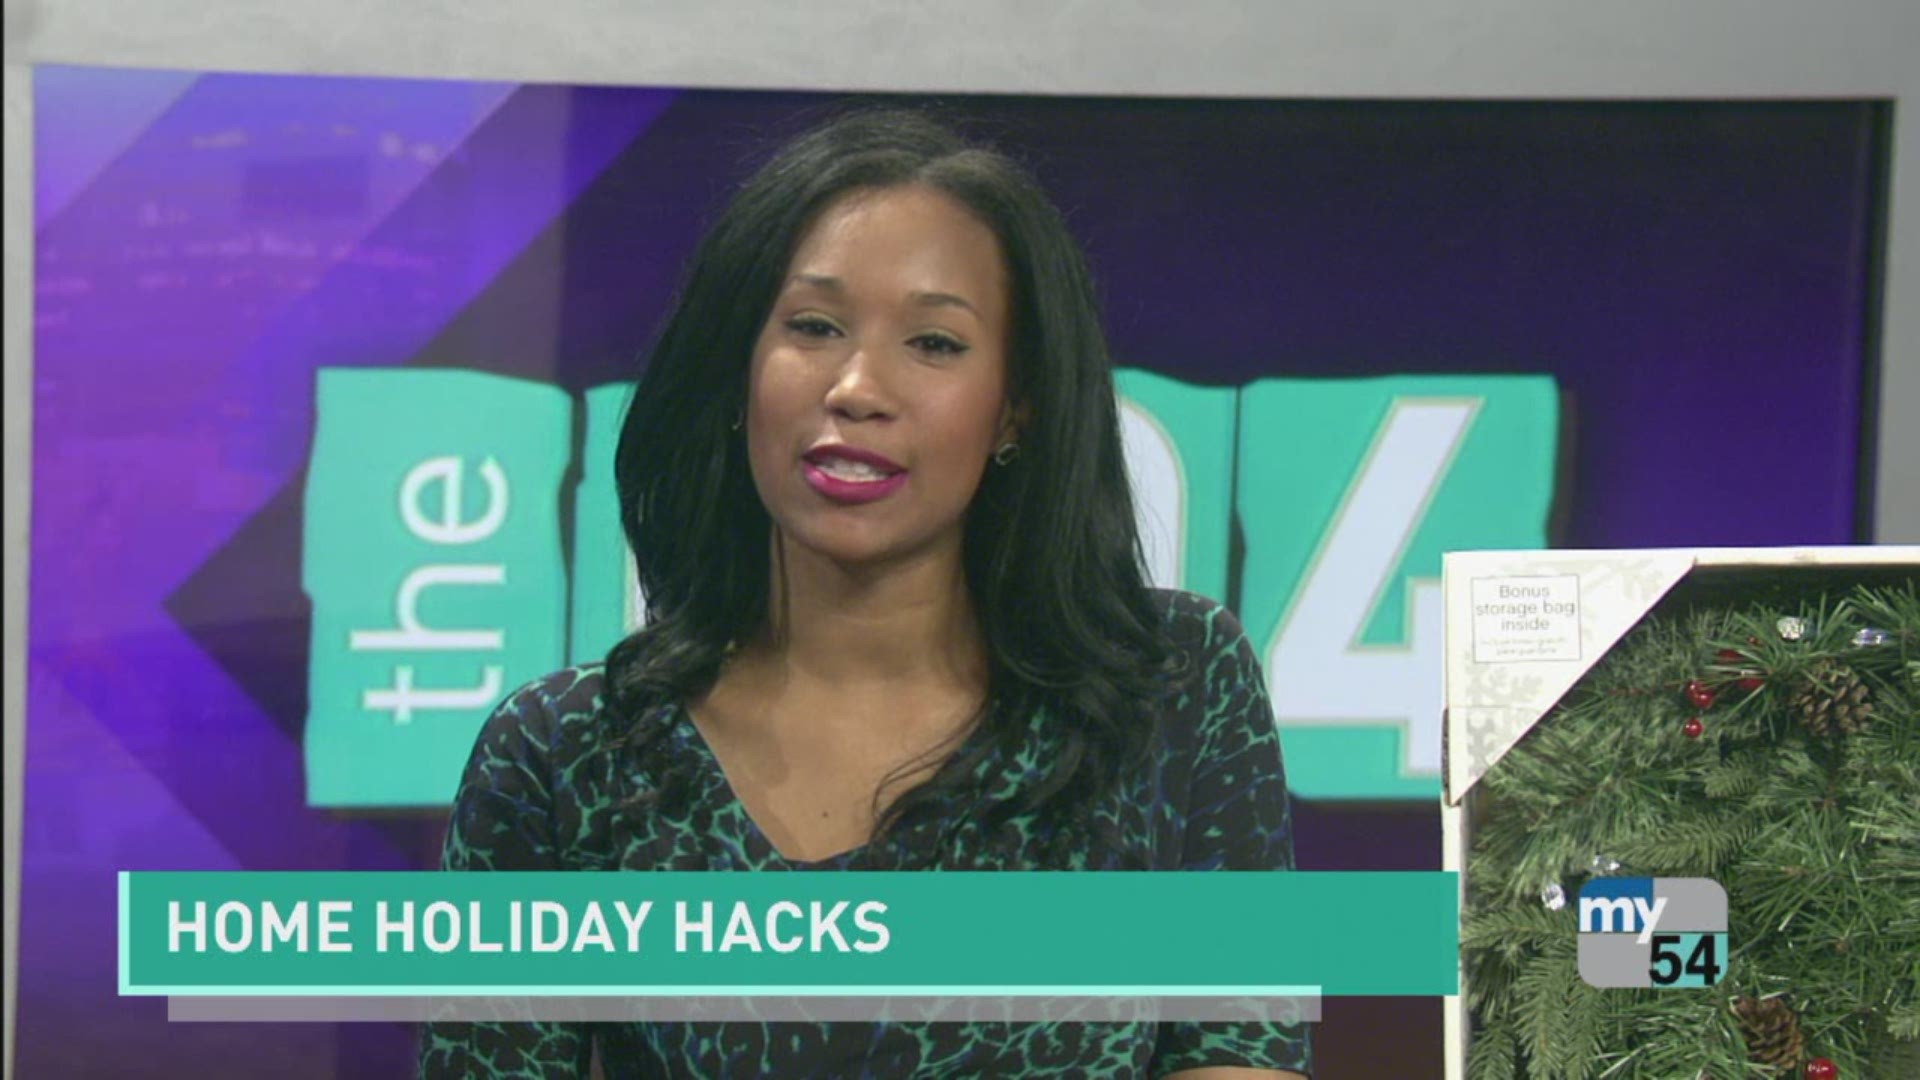 Ace's Home Expert Lou Manfredini is back with some holiday hacks for your seasonal decor.